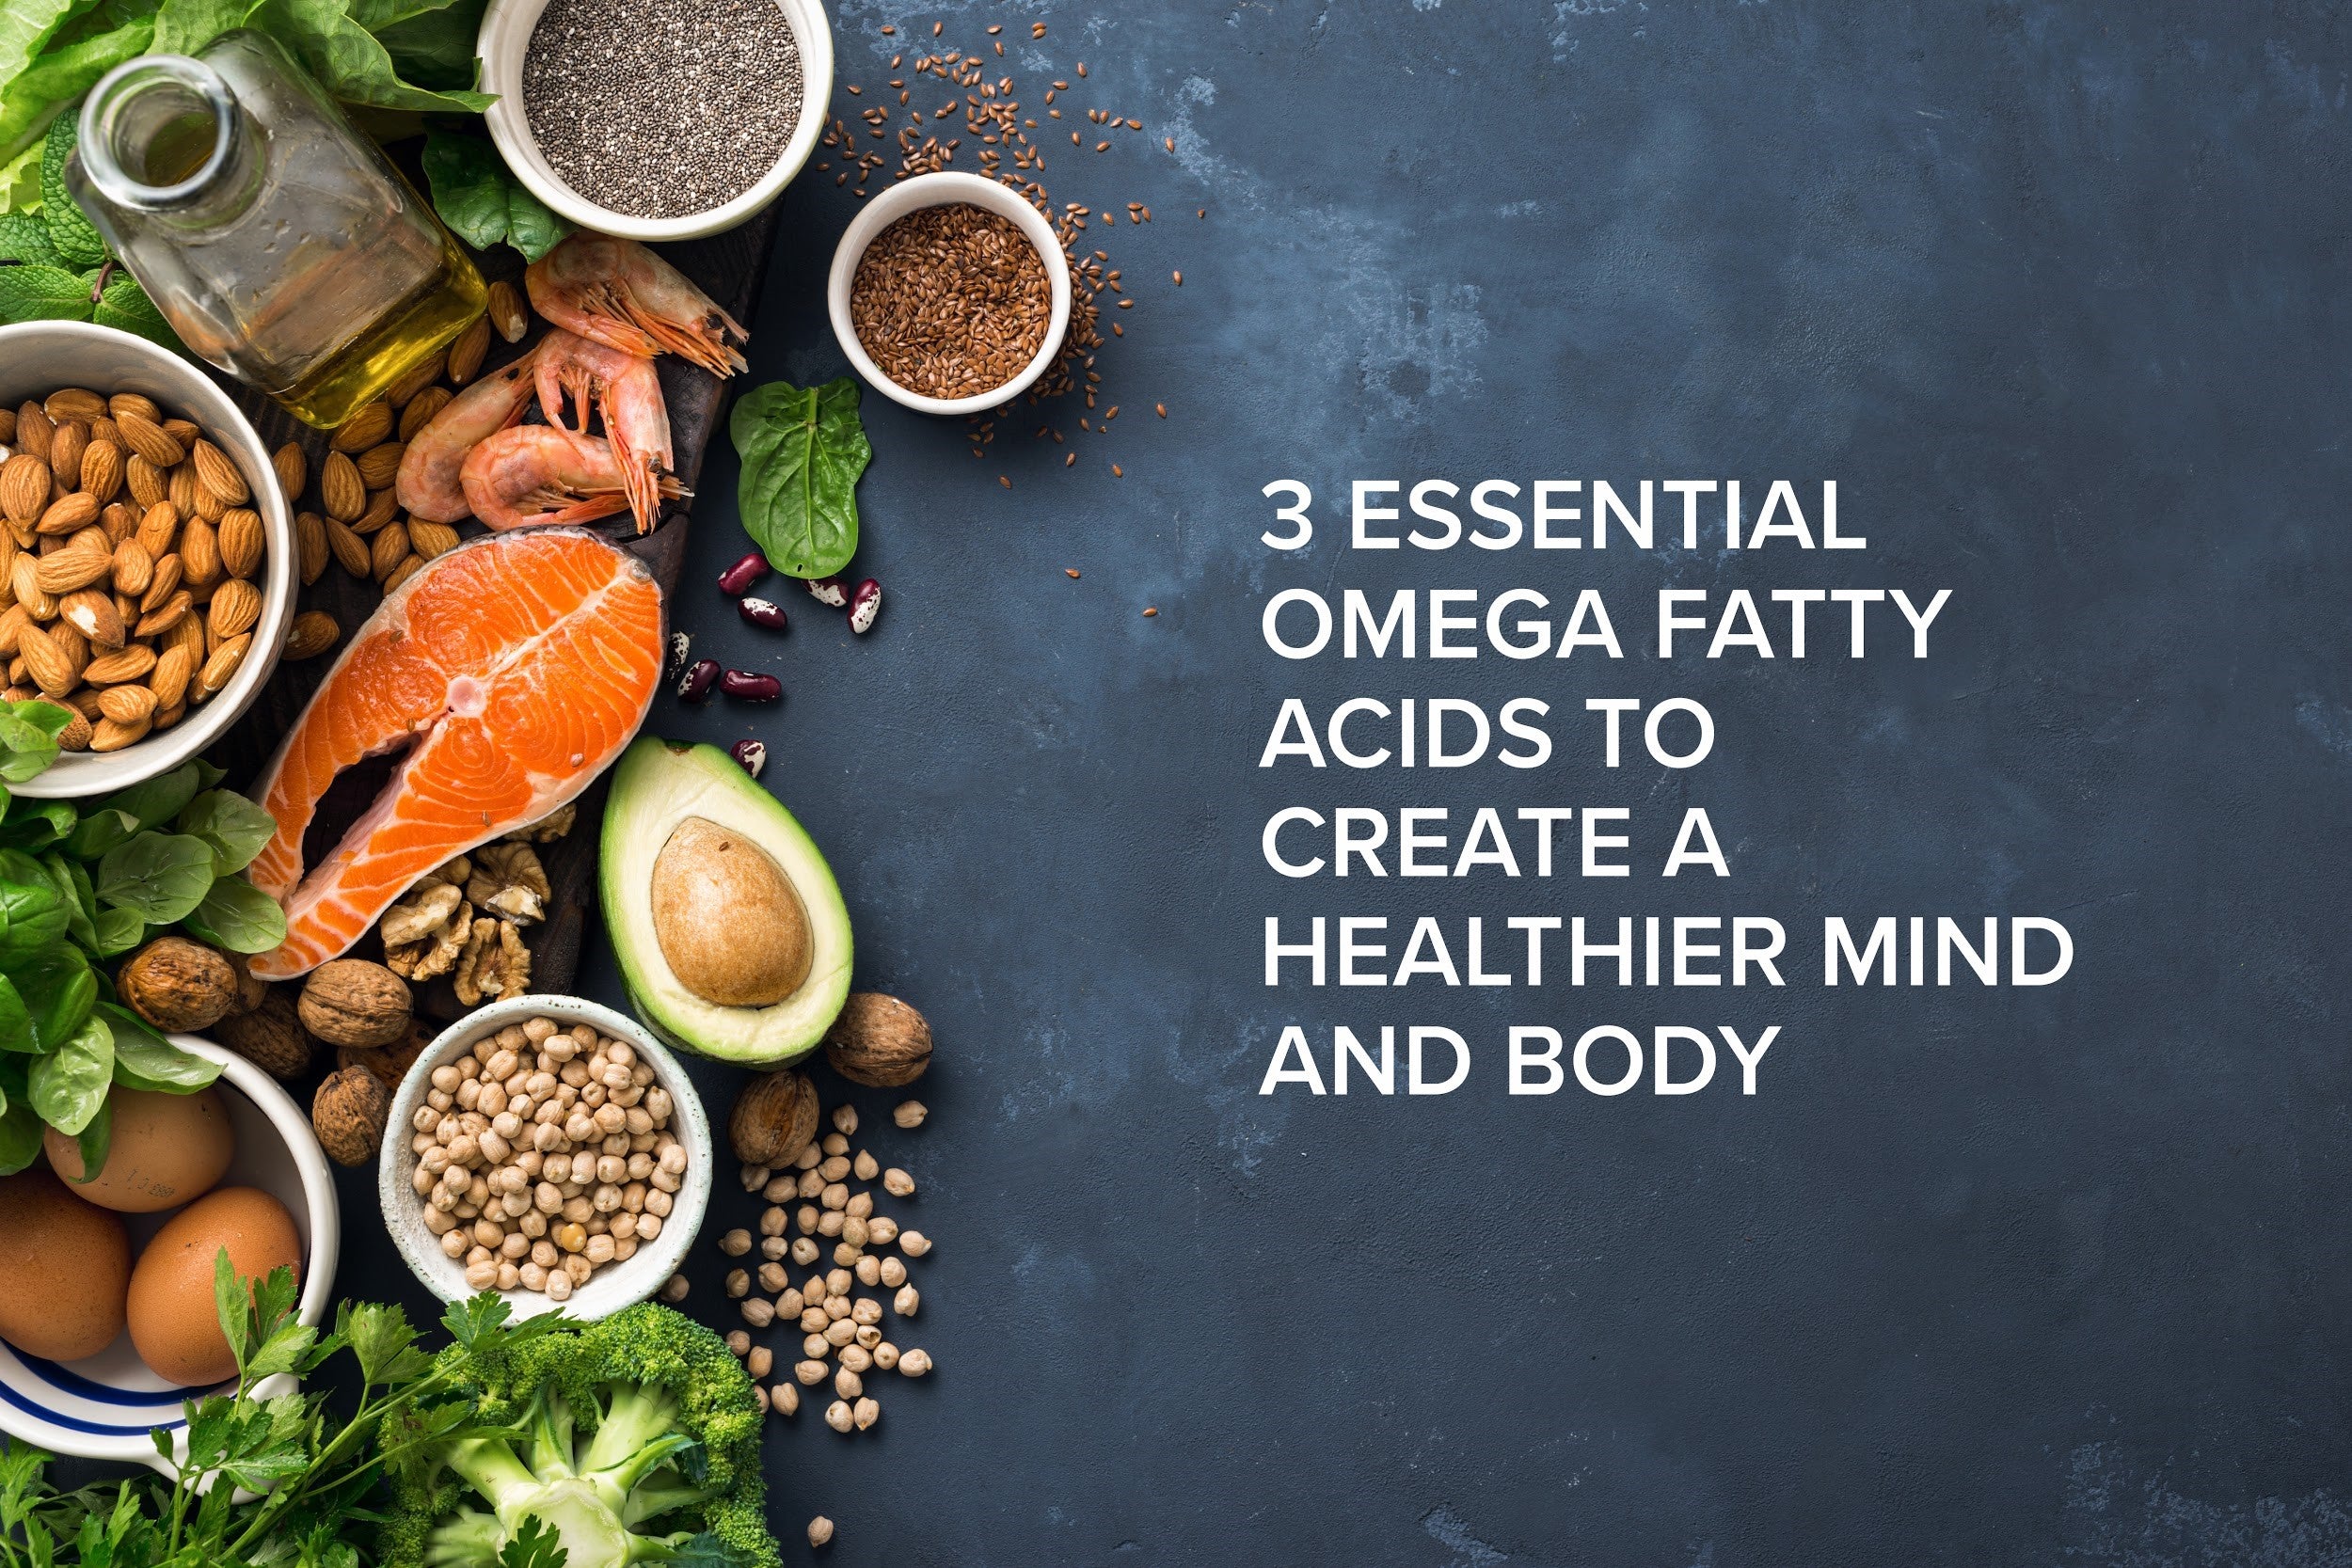 3 Essential Omega Fatty Acids to Create a Healthier Mind and Body